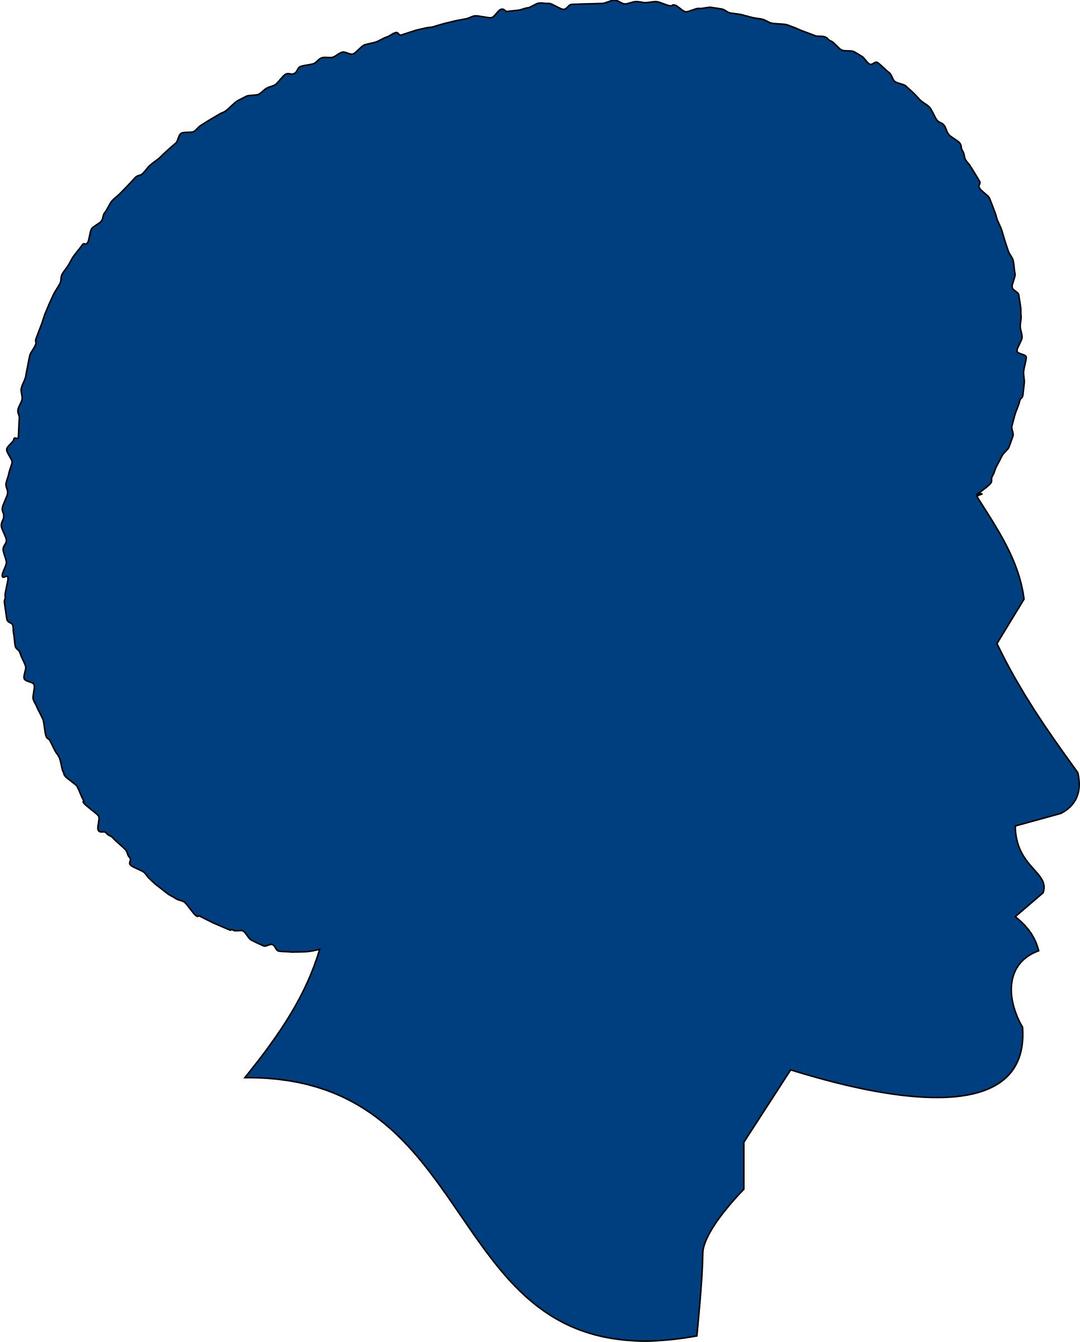 African American Male Silhouette - Remix in Blue w/o Pick png transparent